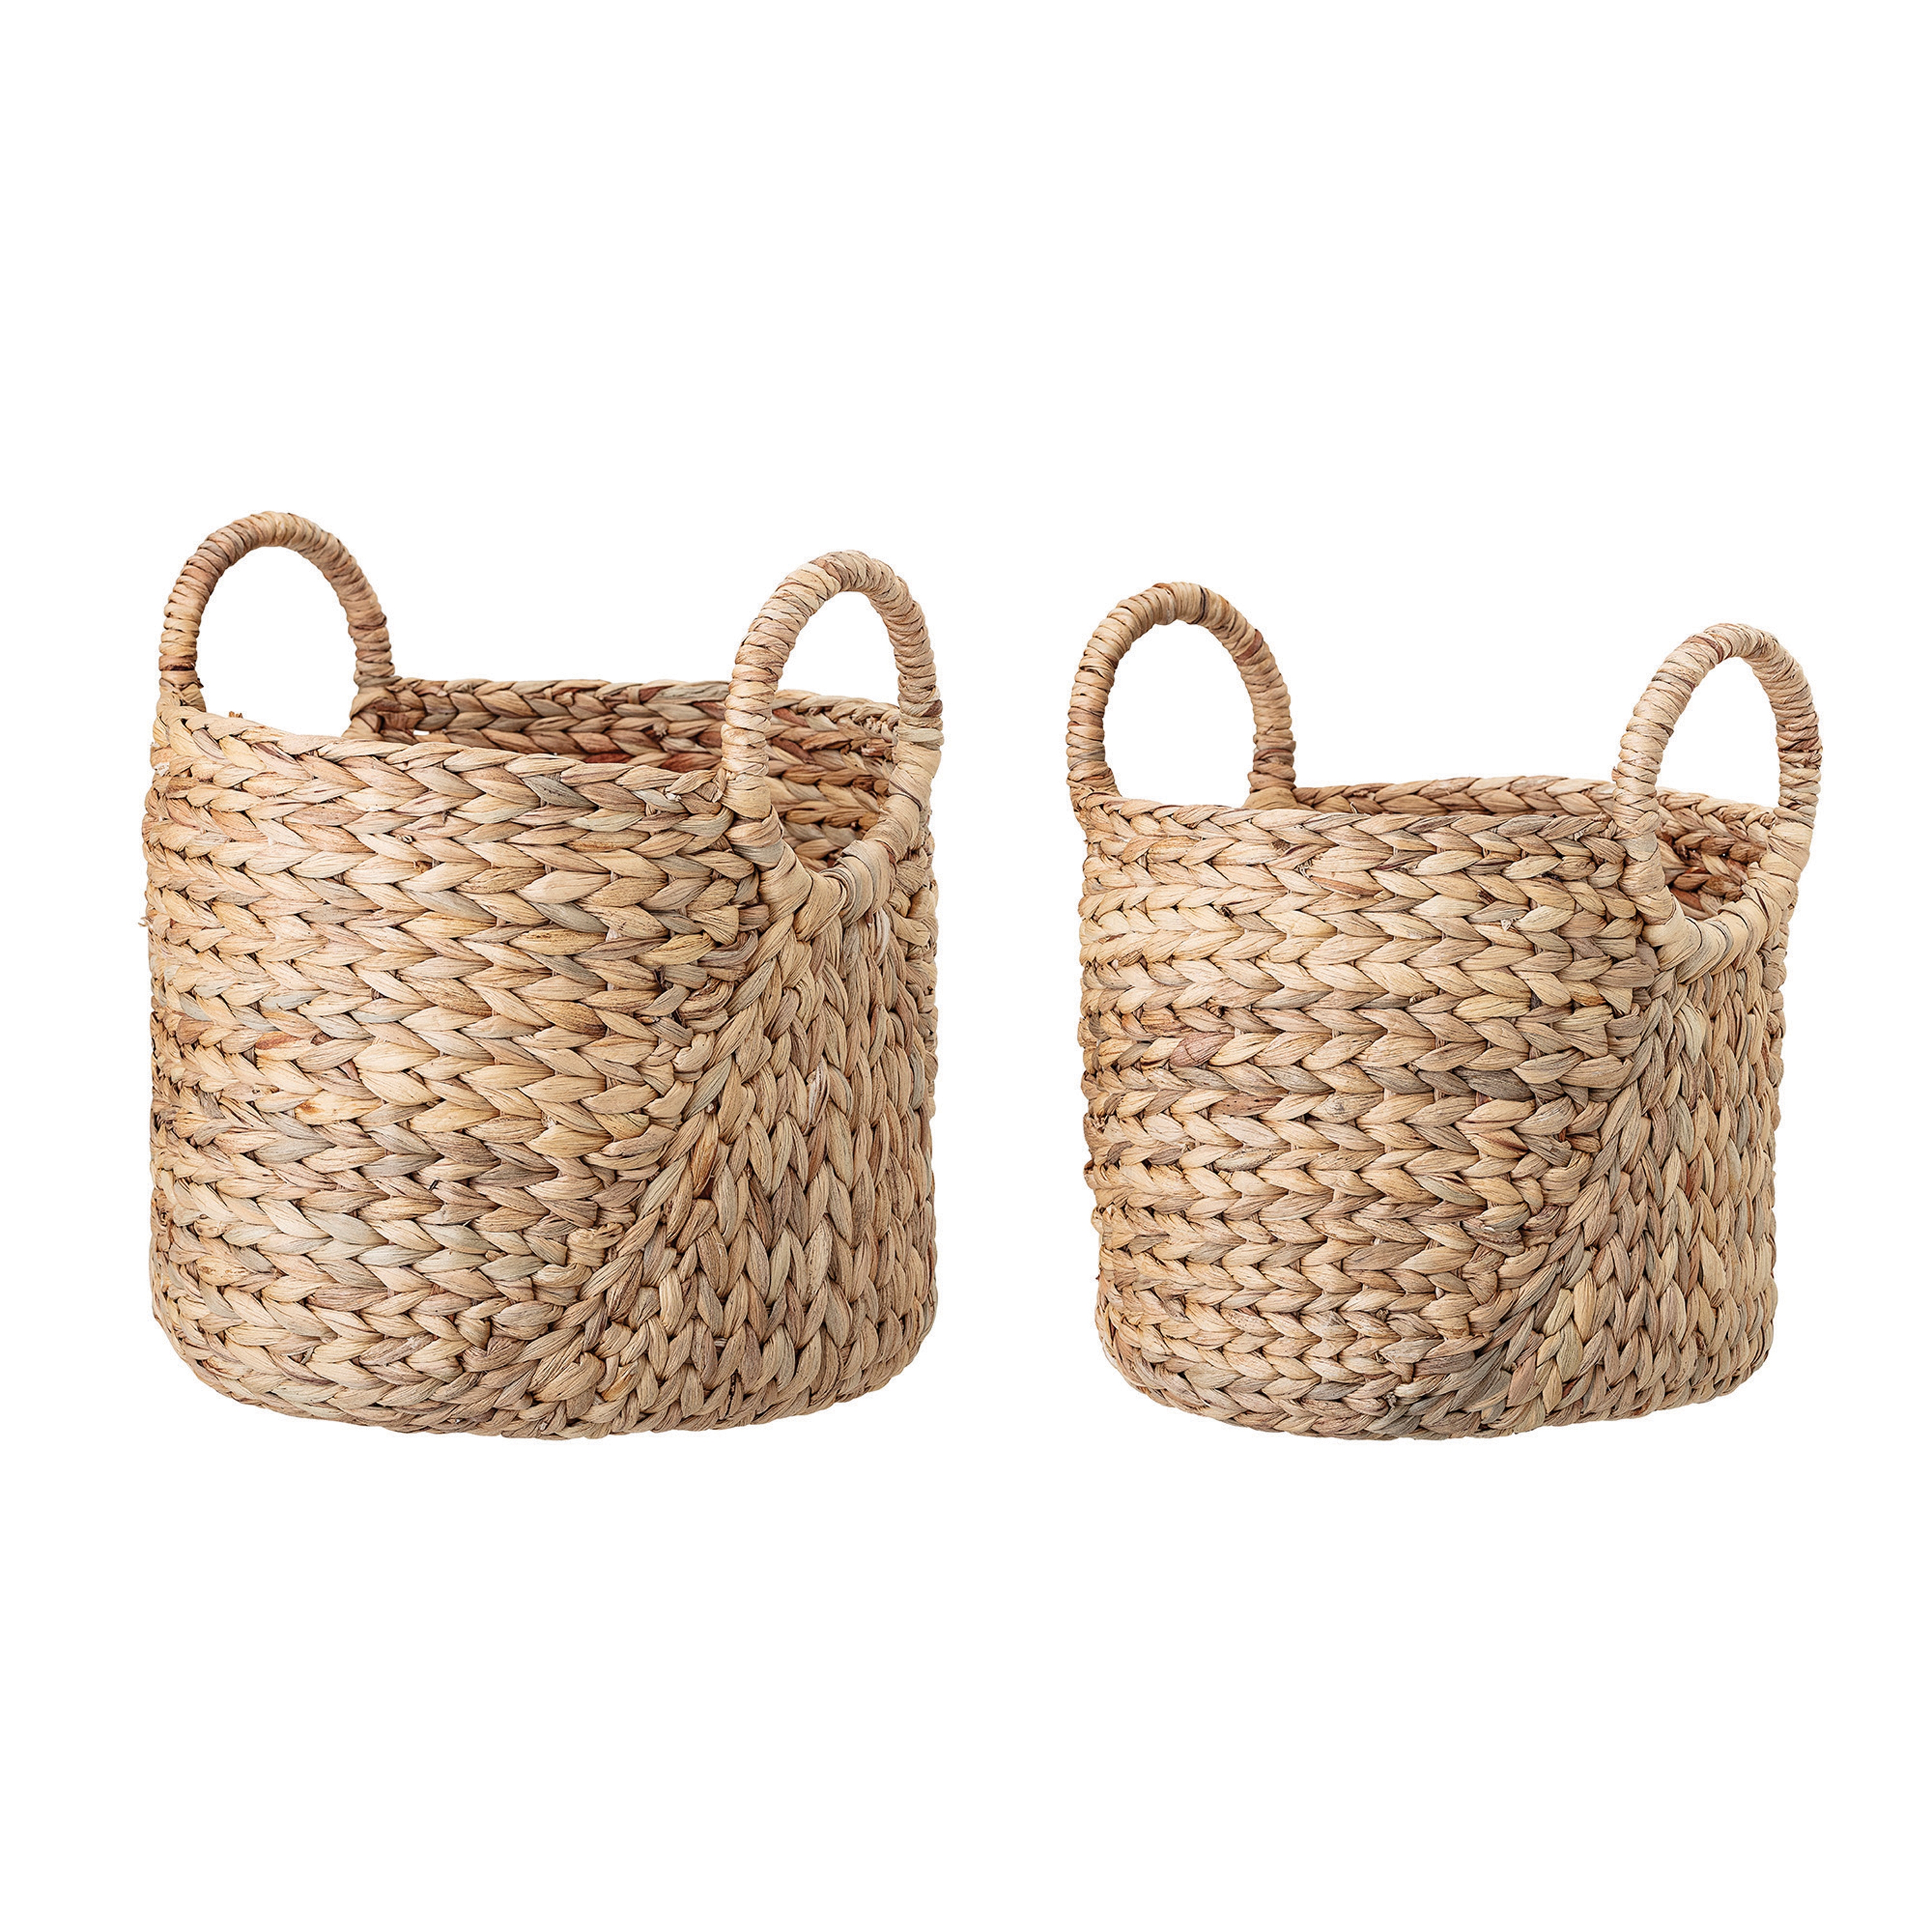 Handwoven Round Handle Seagrass Baskets, Set of 2 - Image 0